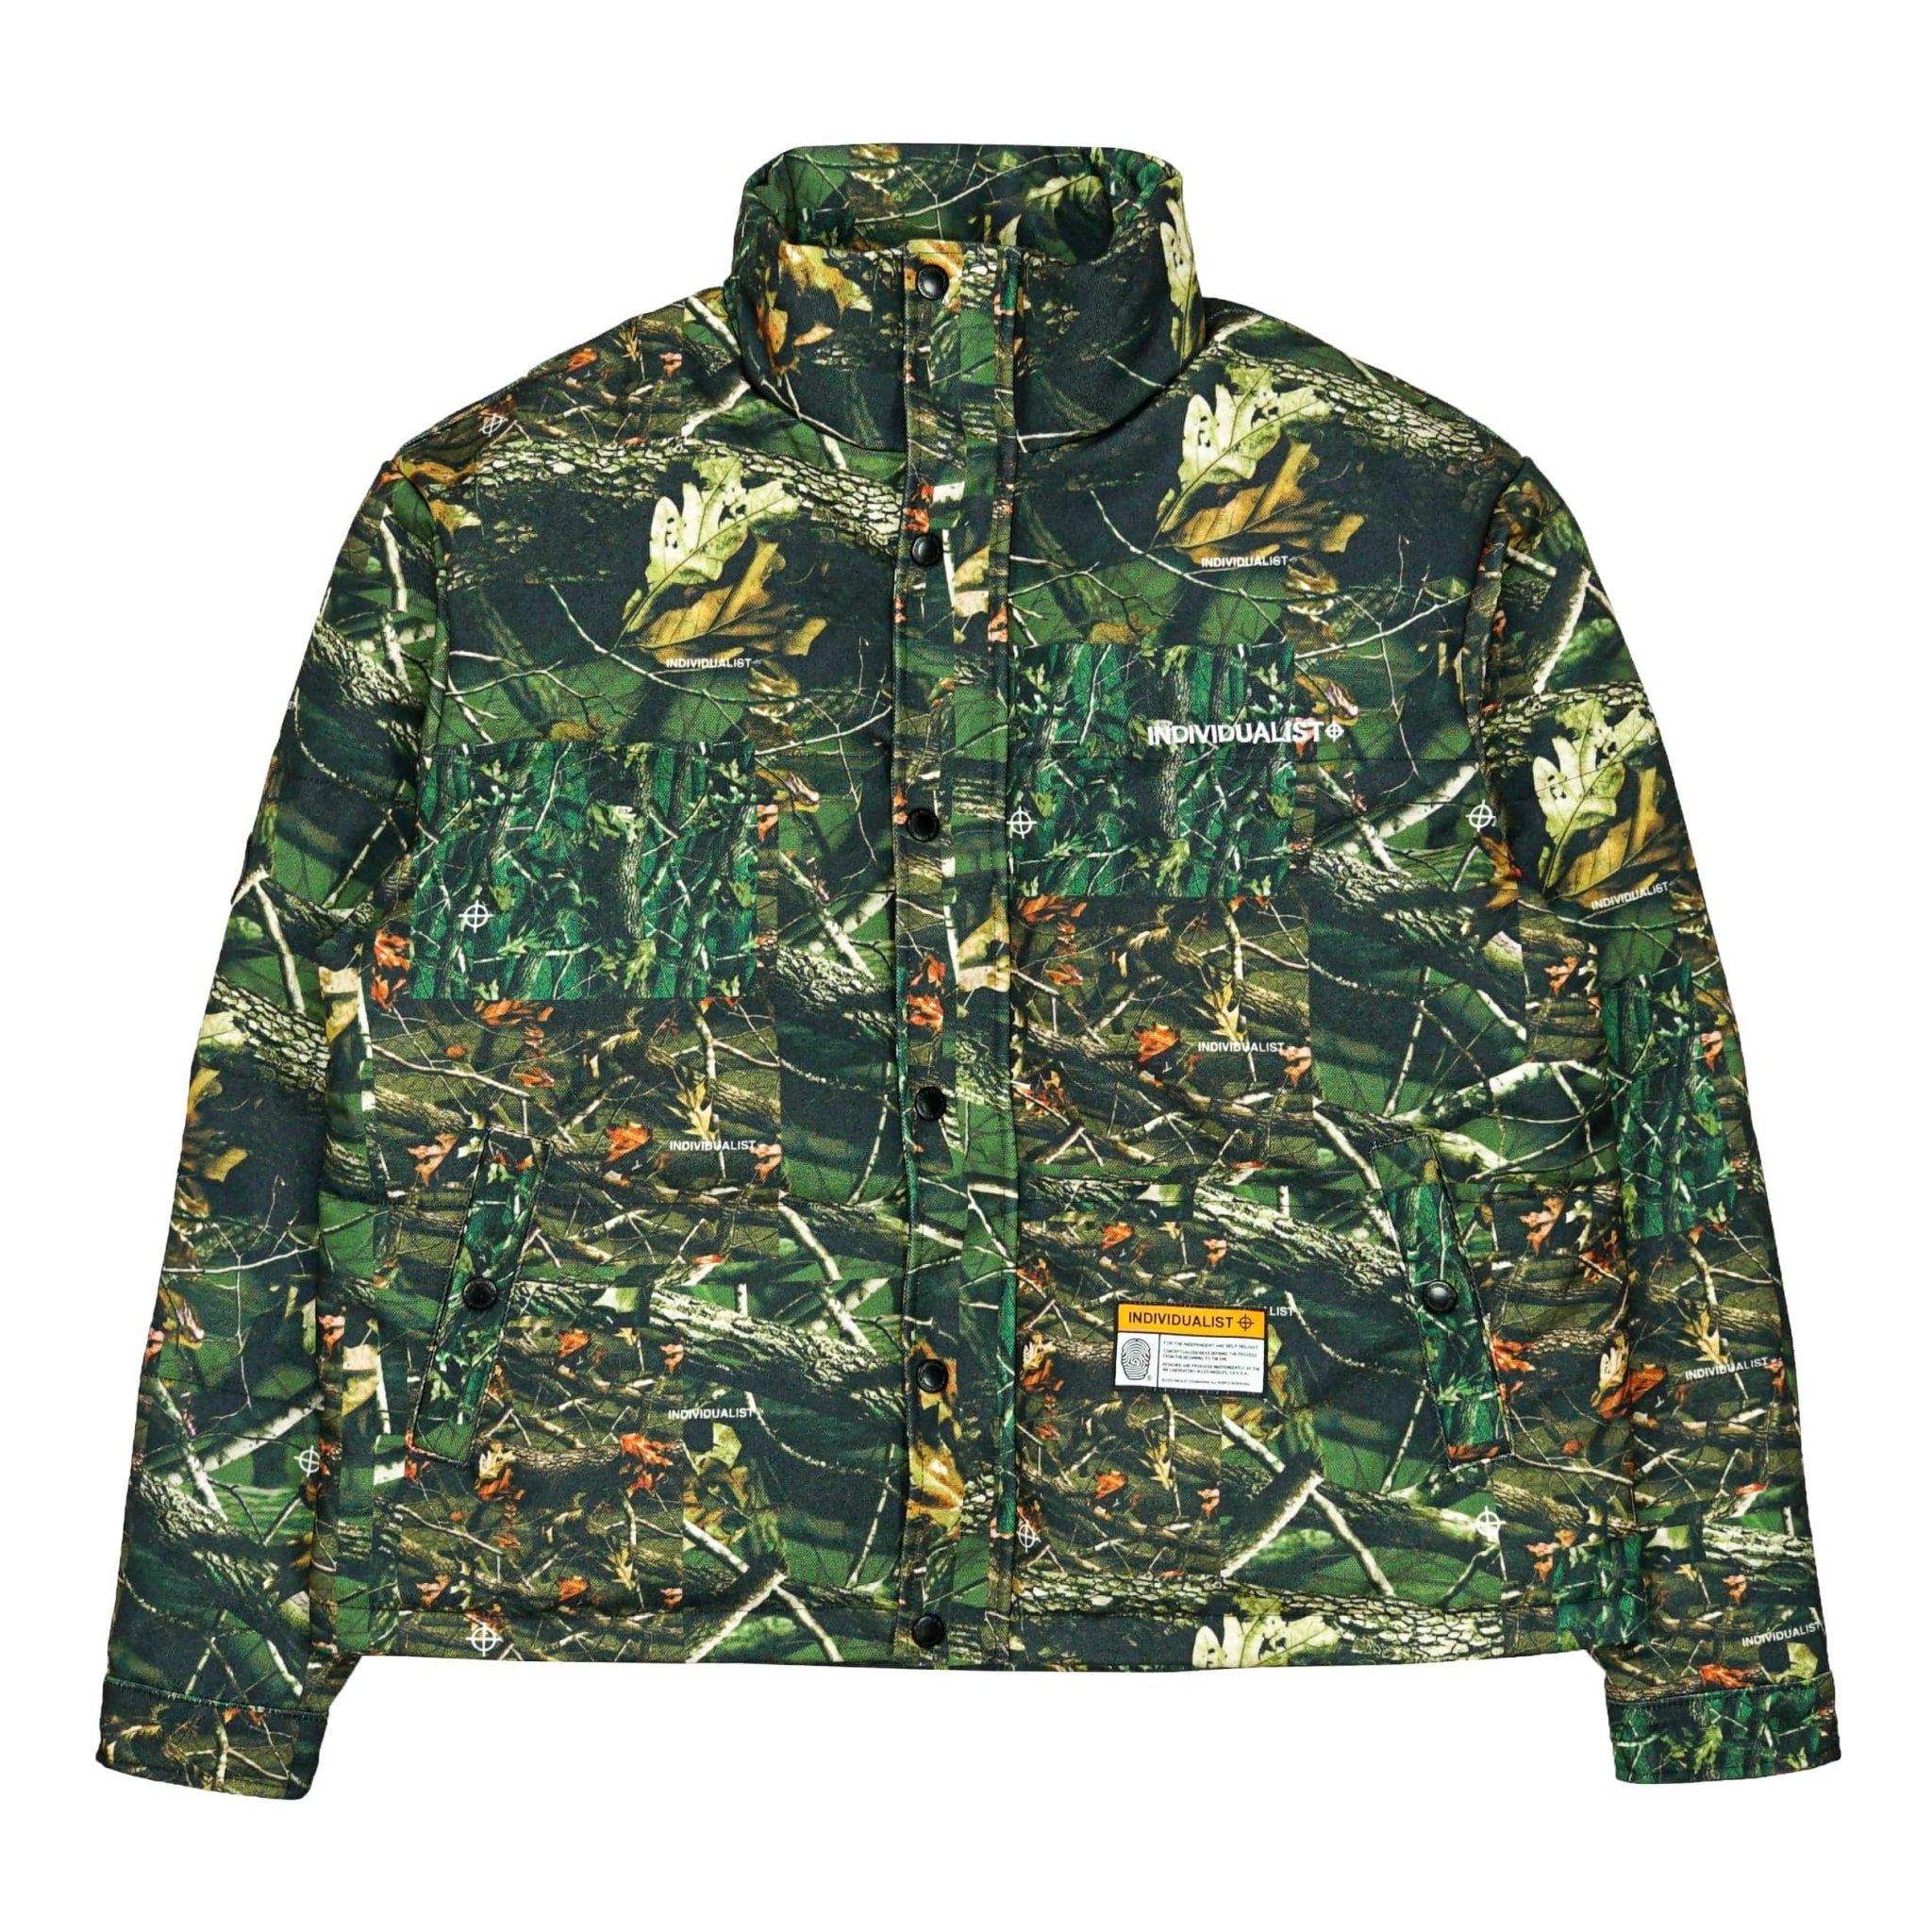 Puffer Duck Canvas Jacket in tree camo